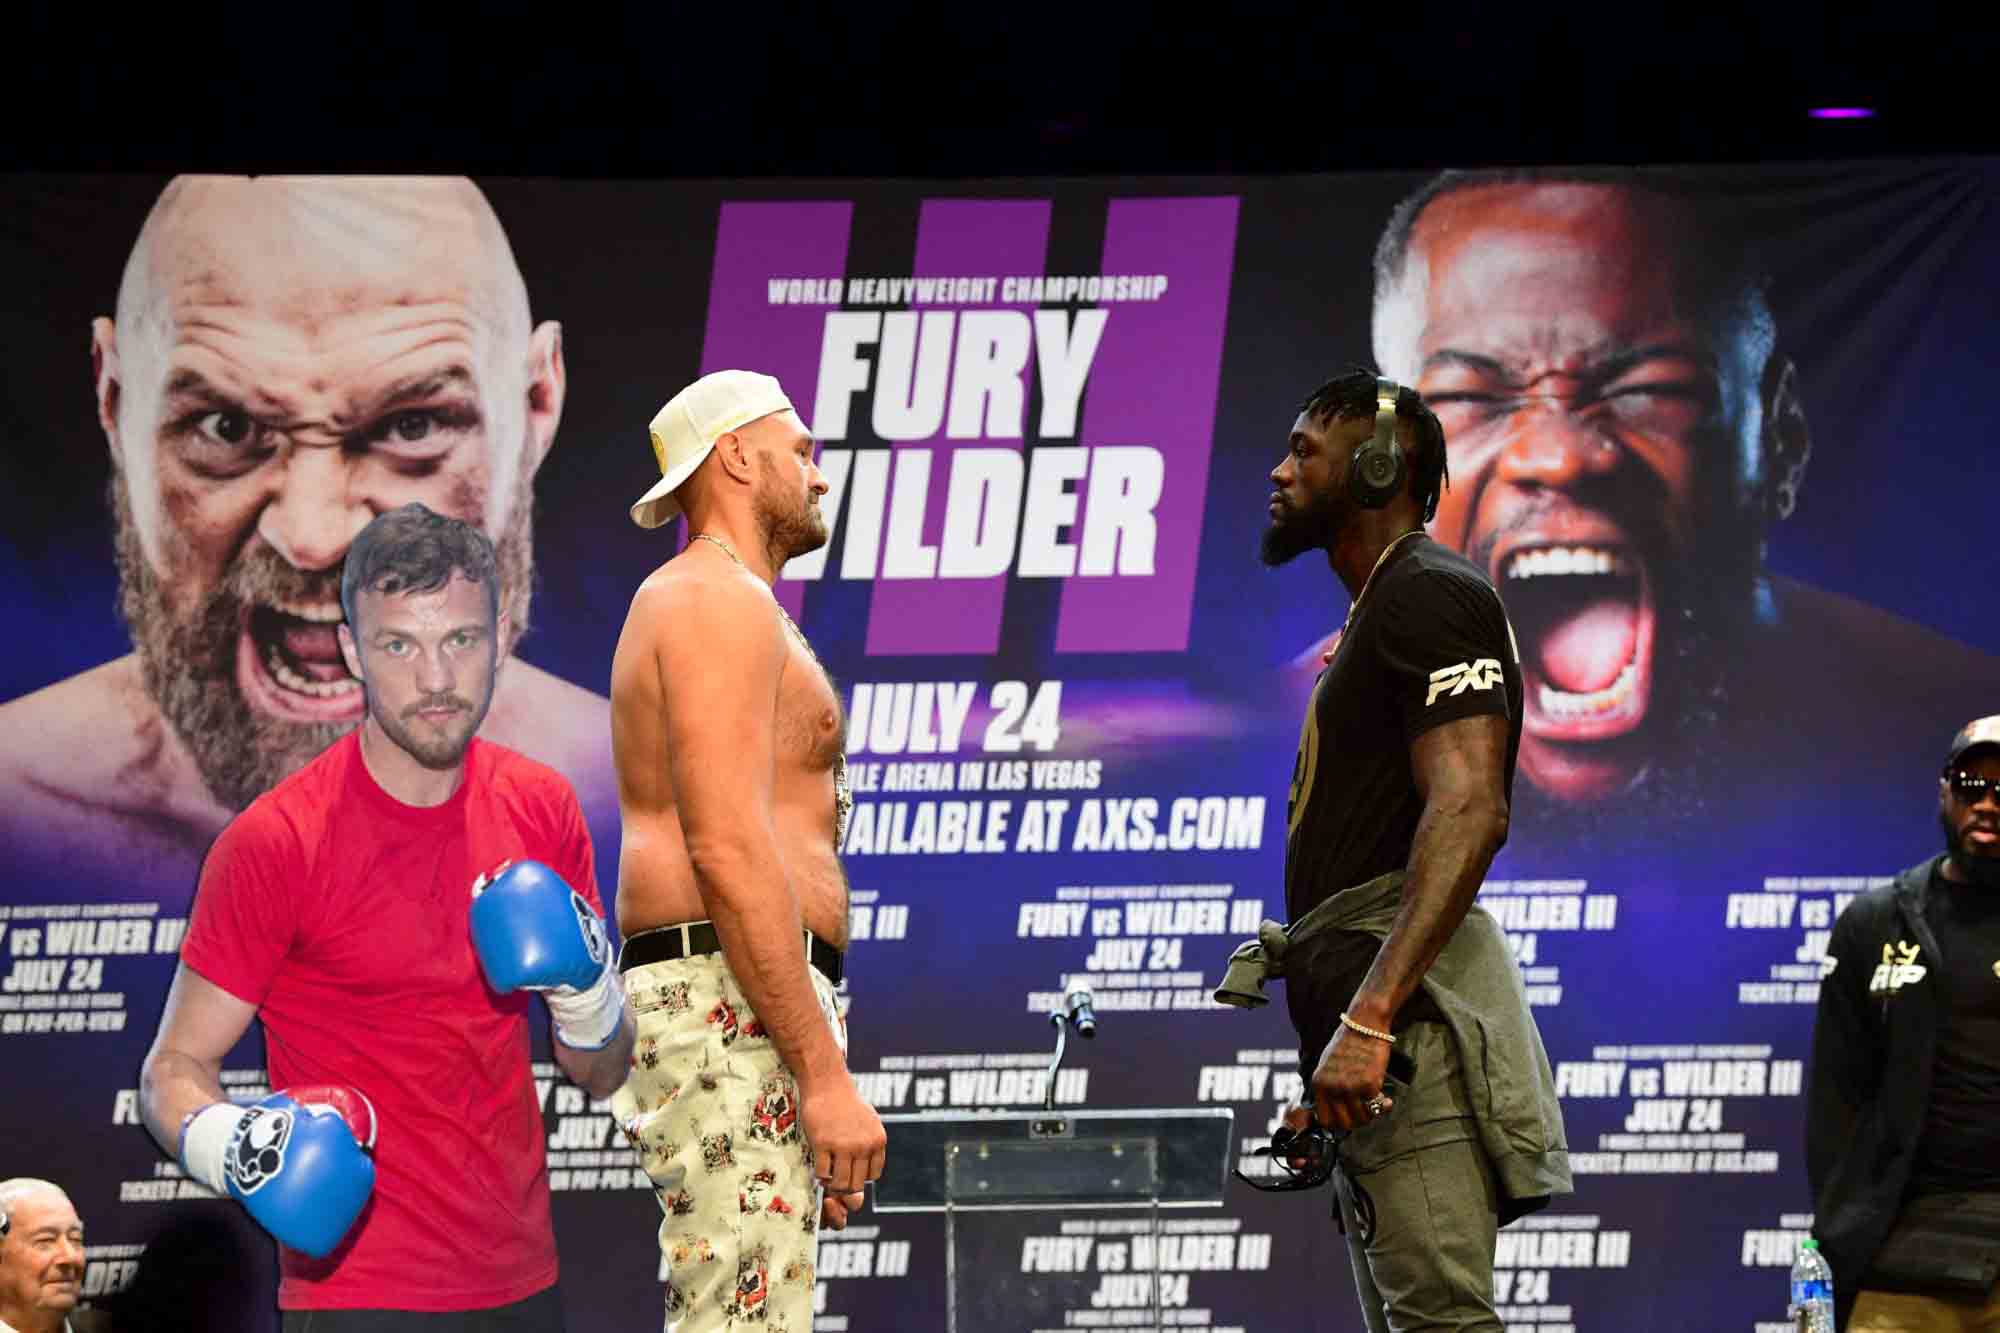 BOXING News: Coach Tyson Fury: "Deontay Wilder has a lot to prove, he will be very motivated"